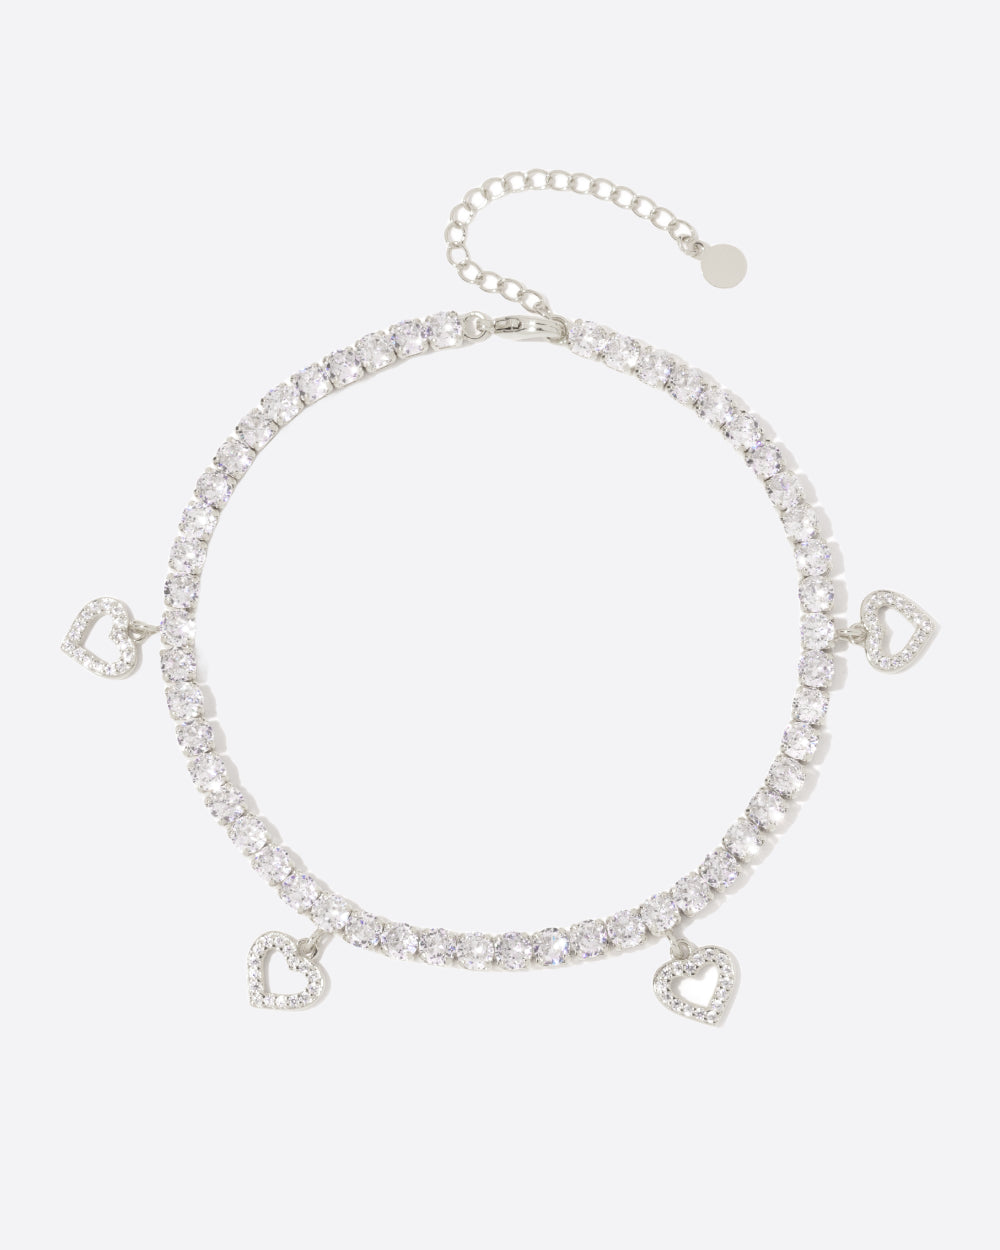 ICED HEARTS TENNIS ANKLET. - 4MM WHITE GOLD